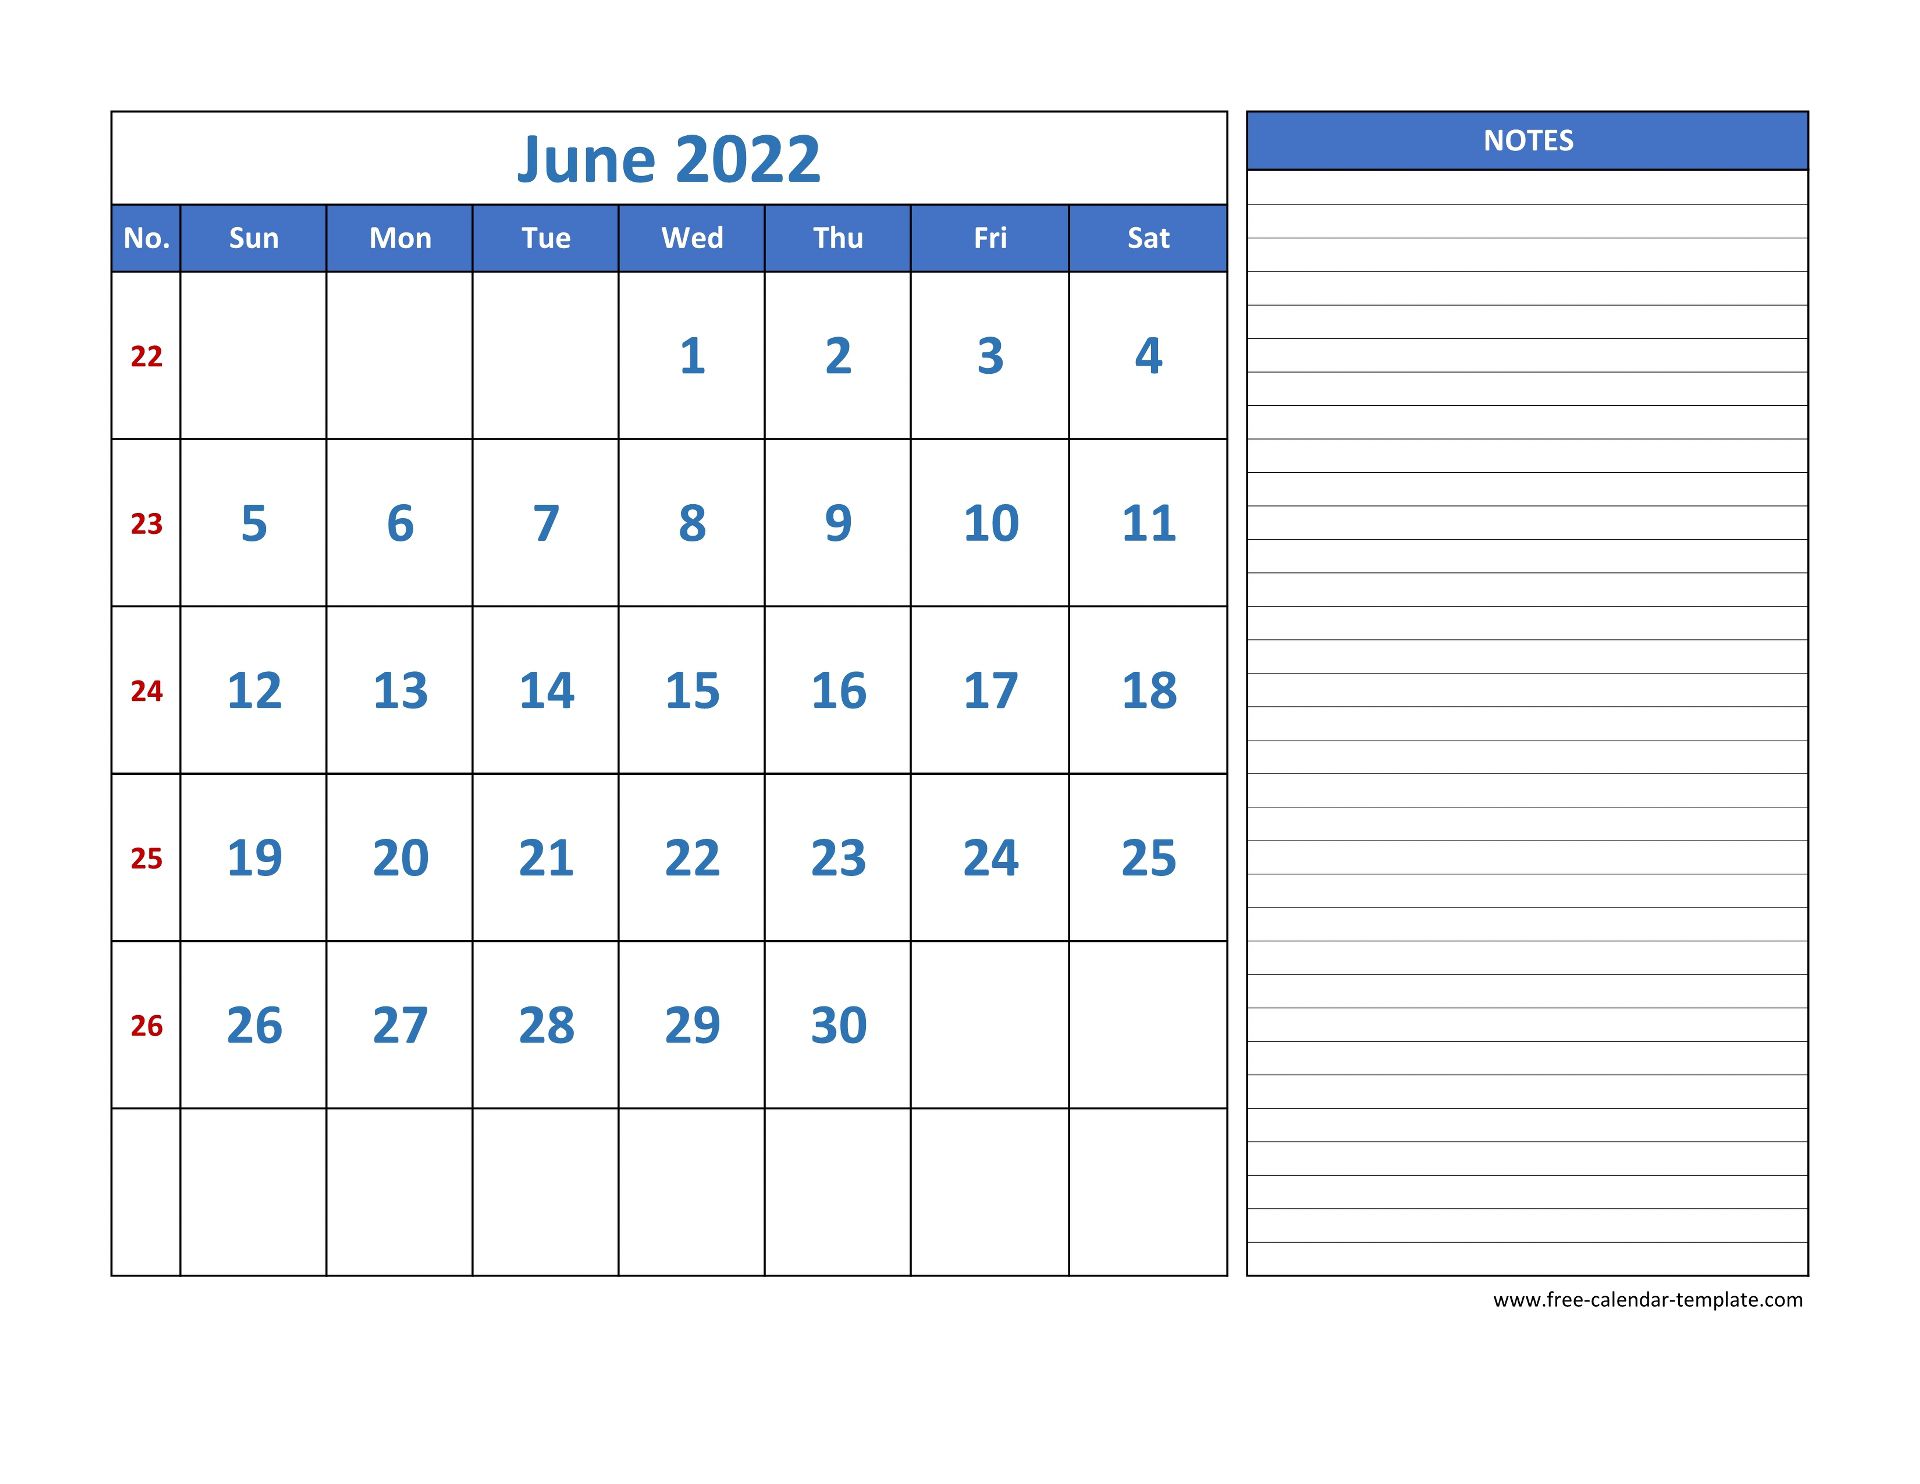 june-calendar-2022-grid-lines-for-holidays-and-notes-horizontal